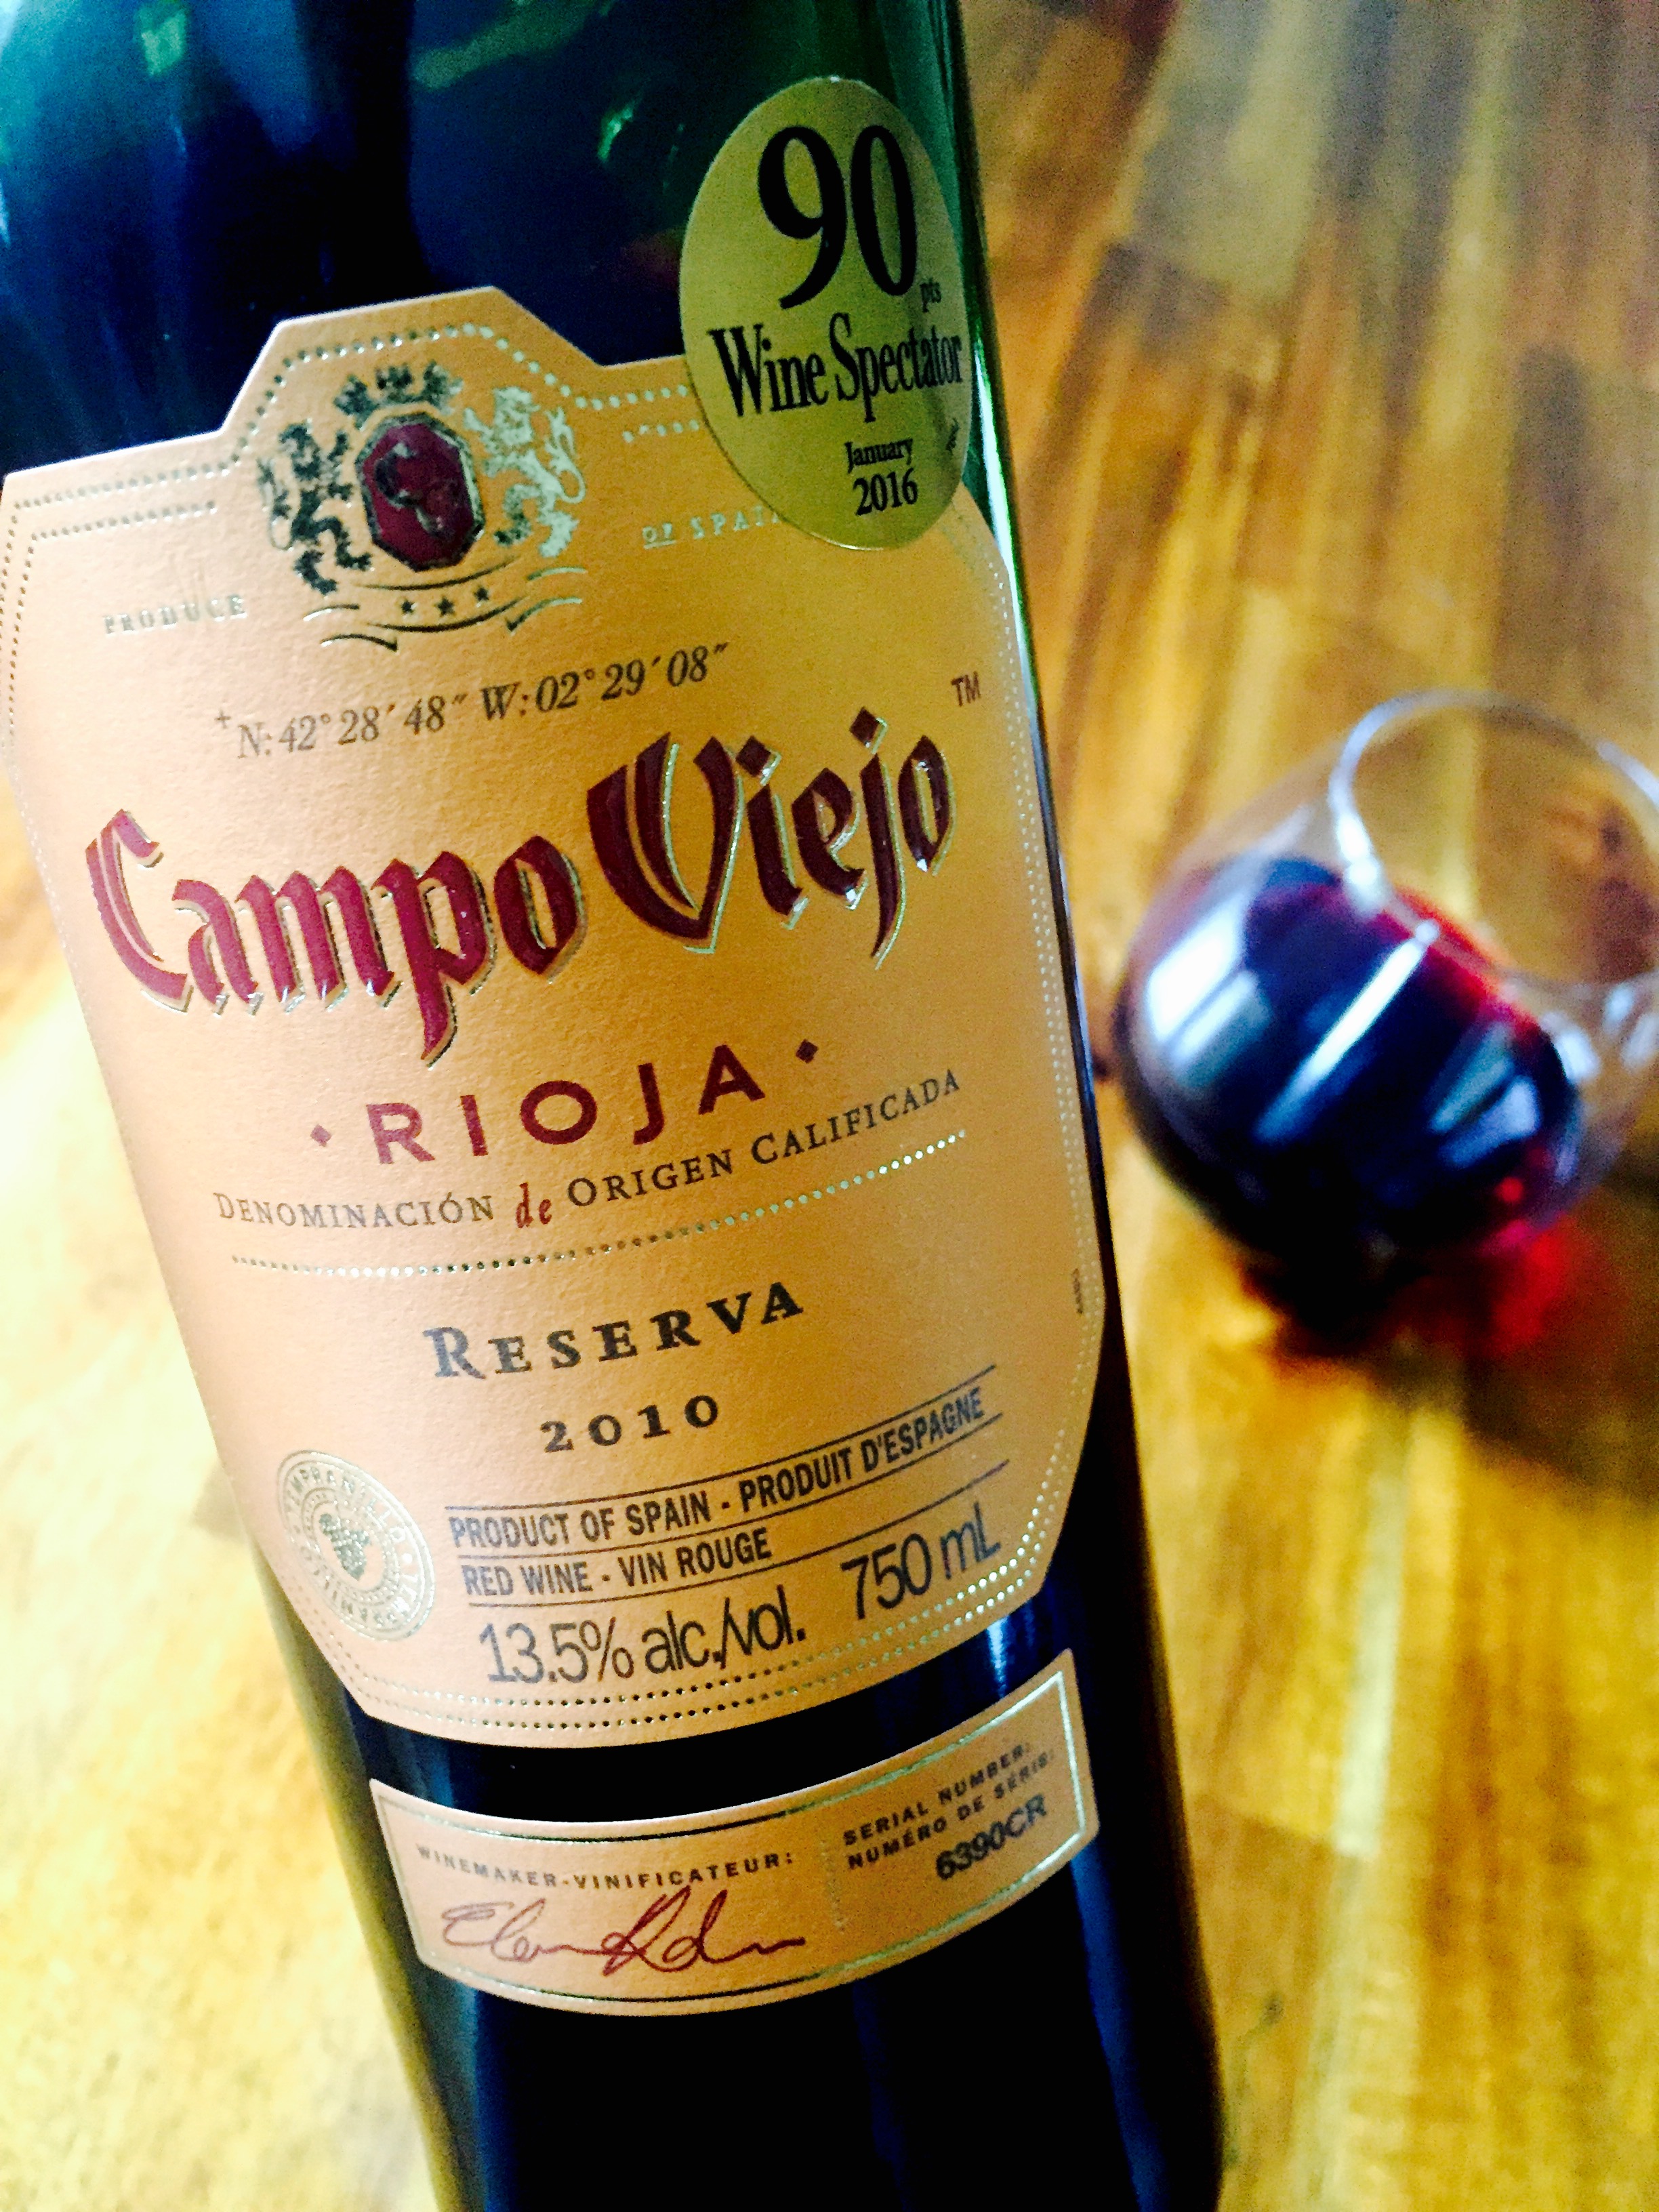 This 2010 Campo Viejo Rioja Reserva from Spain was delicious